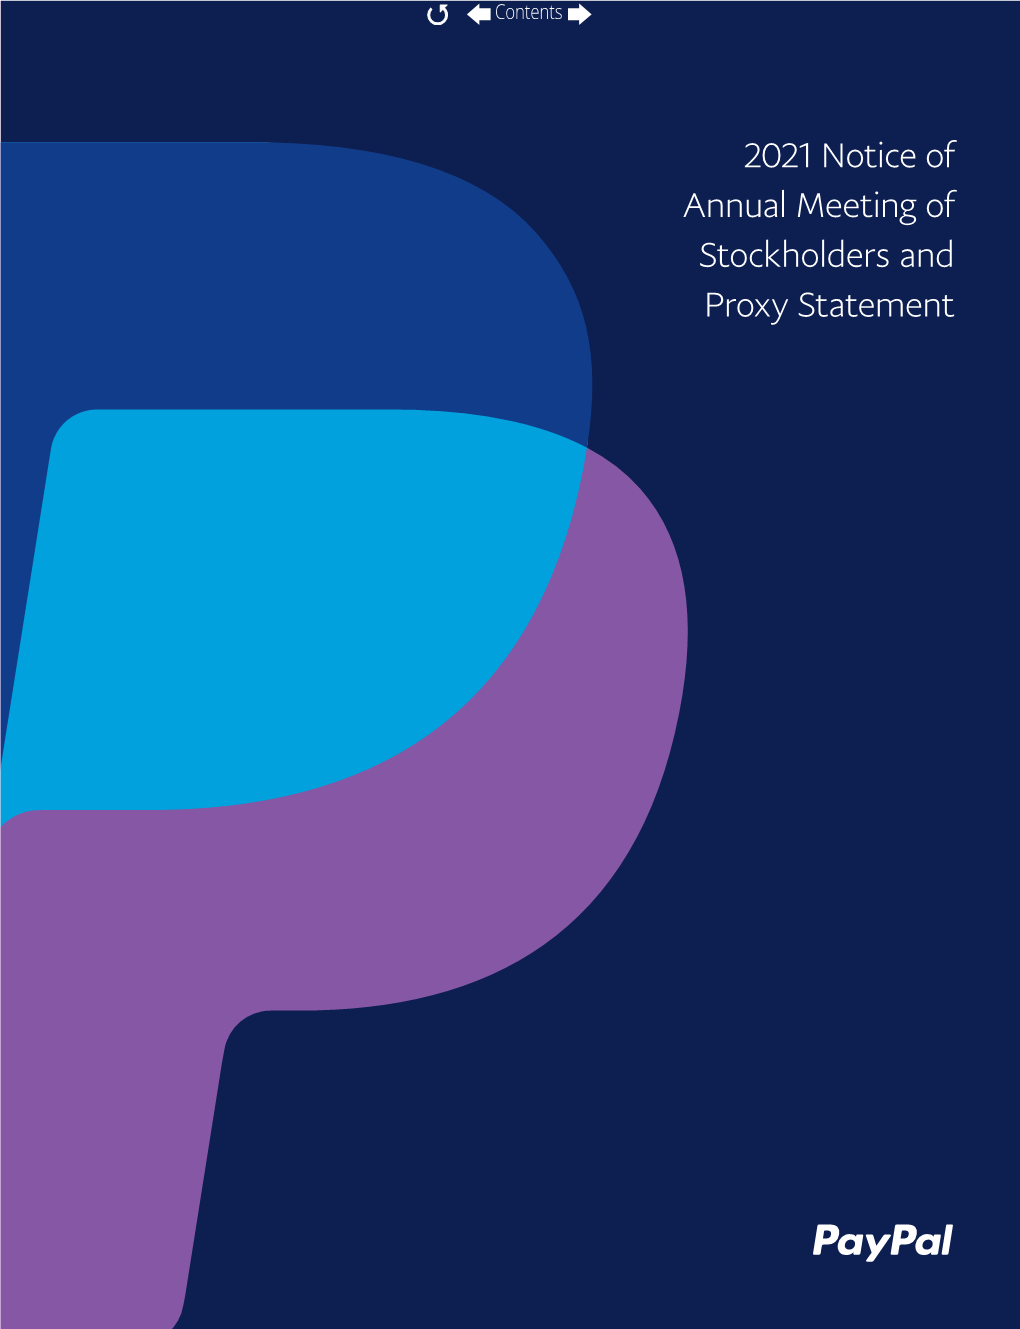 2021 Notice of Annual Meeting of Stockholders and Proxy Statement